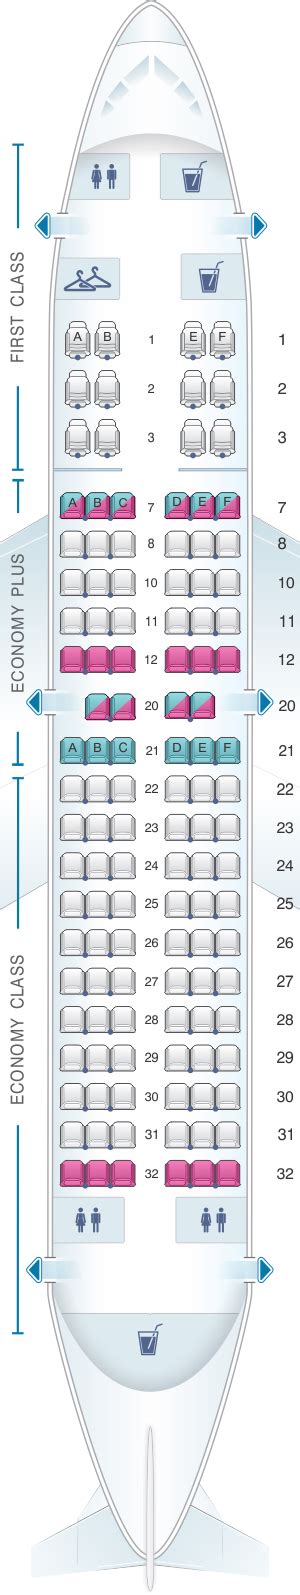 United Airlines added the Boeing 737 MAX 9 to their fleet in 2018. The aircraft is configured with First, Economy Plus and Economy Class seating. The standard seats in Economy feature a redesign of the back literature pocket and tray table to provide additional legspace. The seats also contain a tablet/personal device holder positioned at a ...